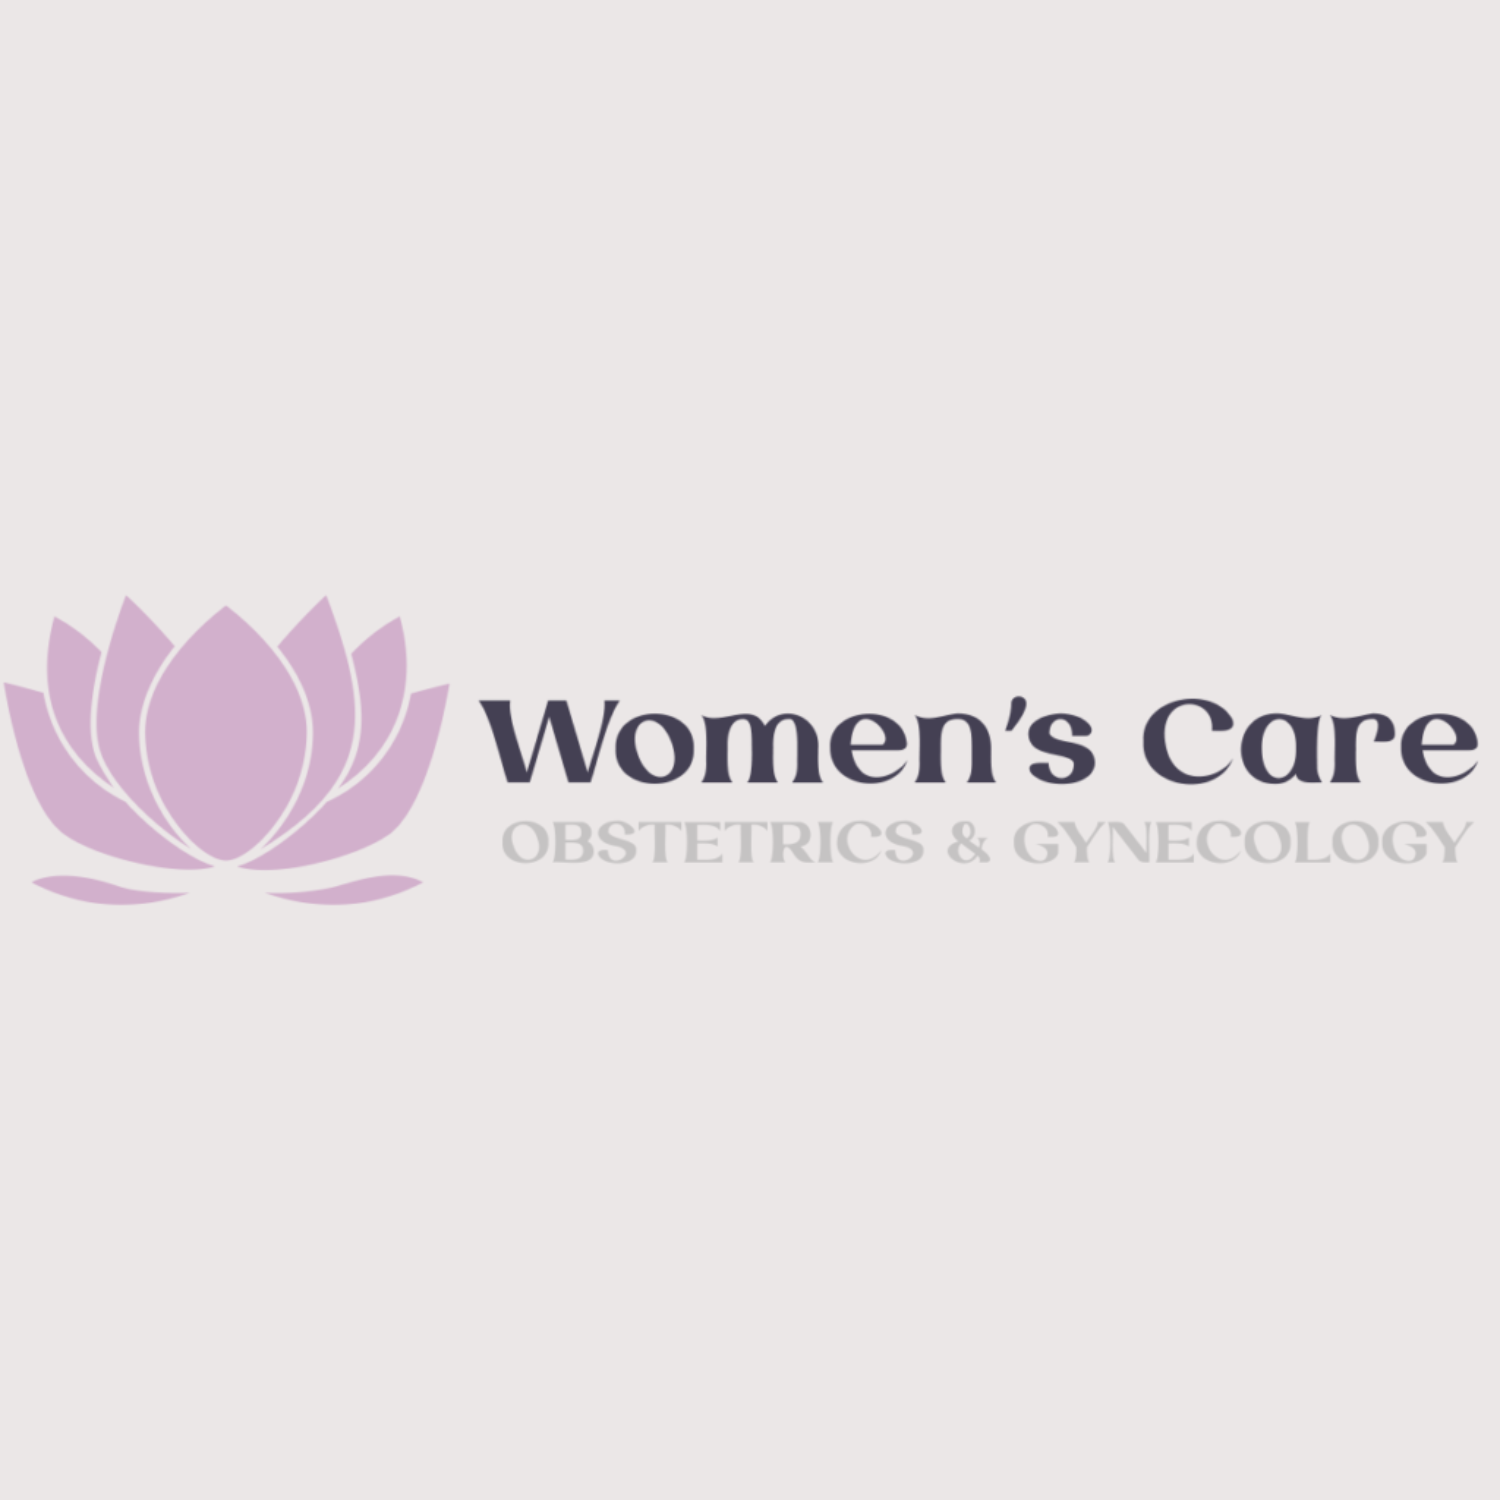 Women's Care Mid America Physician Services, LLC - Shawnee Mission, KS 66204 - (913)384-4990 | ShowMeLocal.com